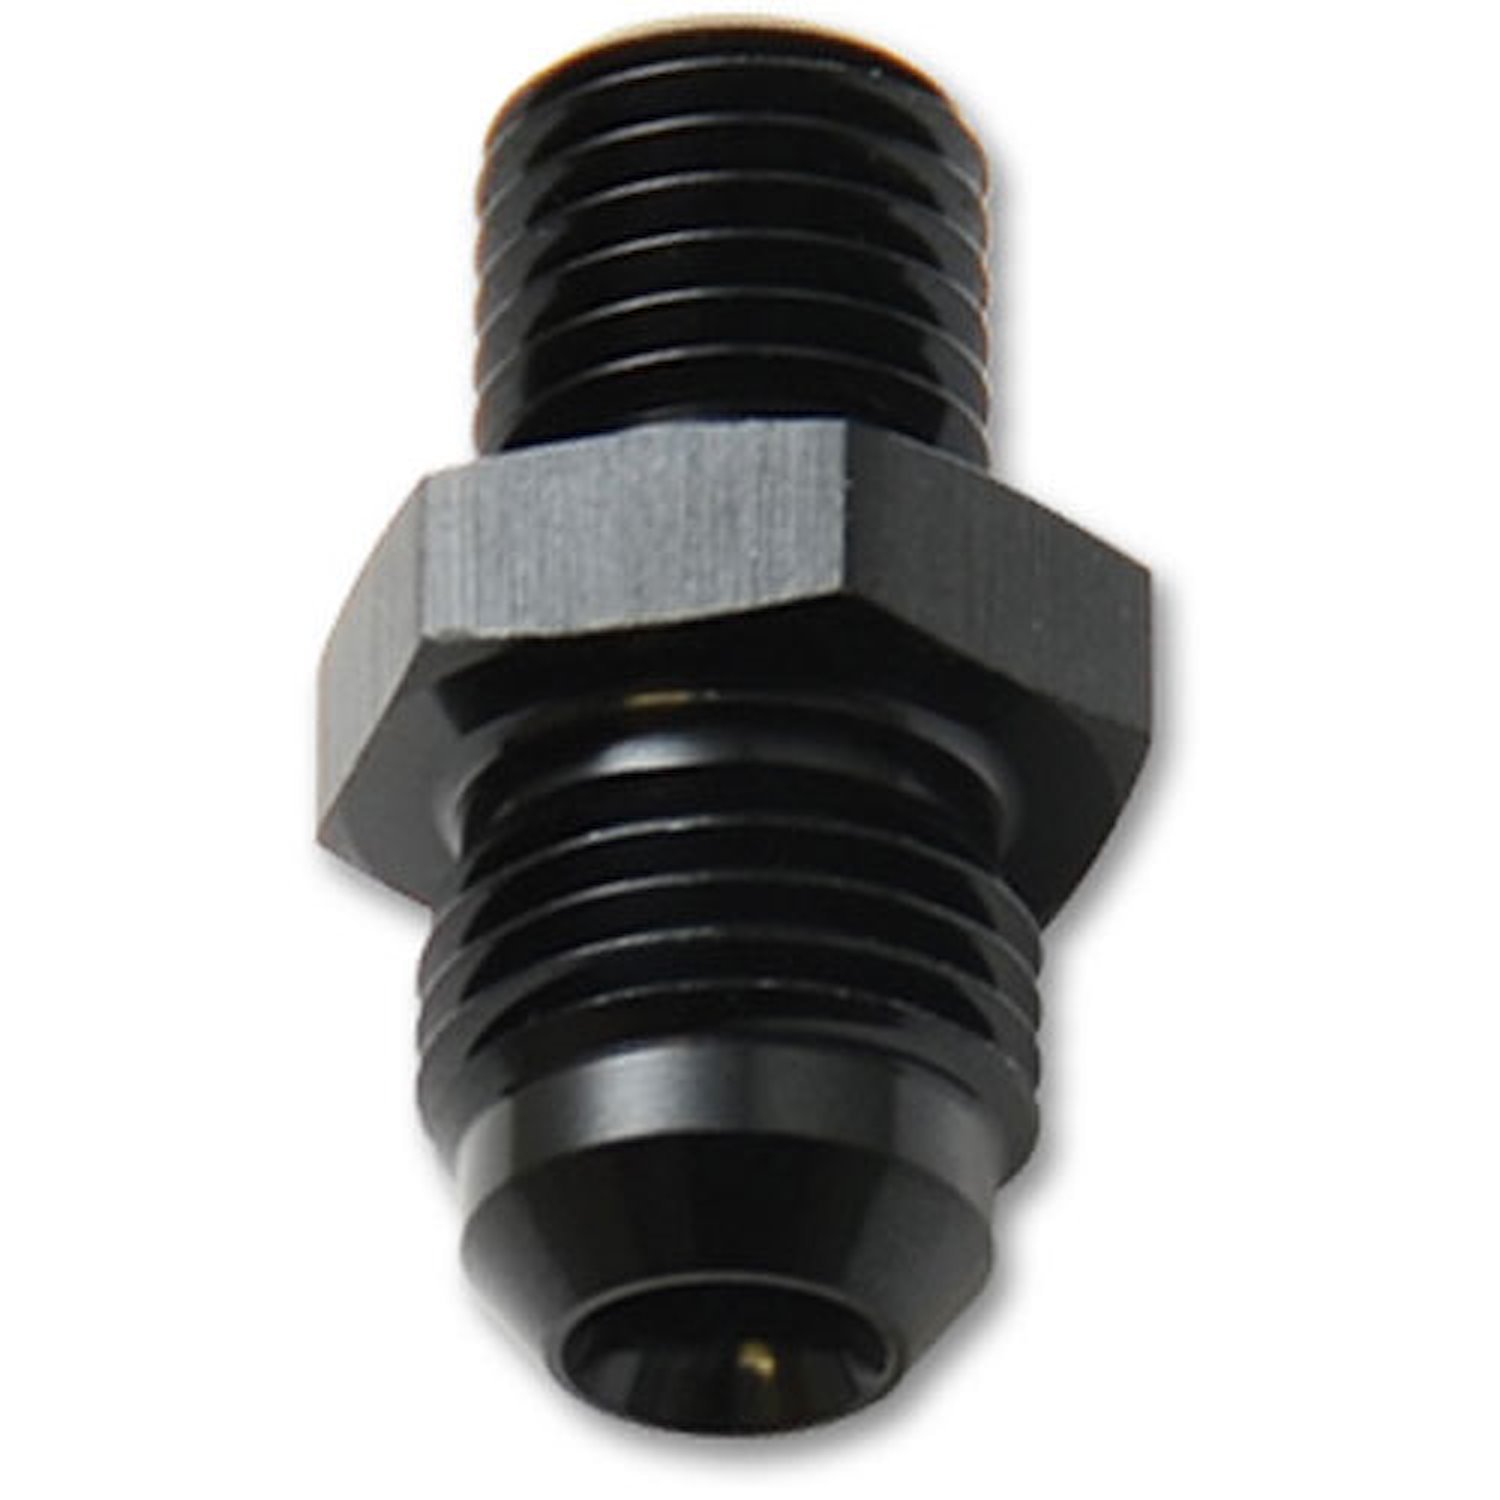 AN to Metric Adapter Fitting